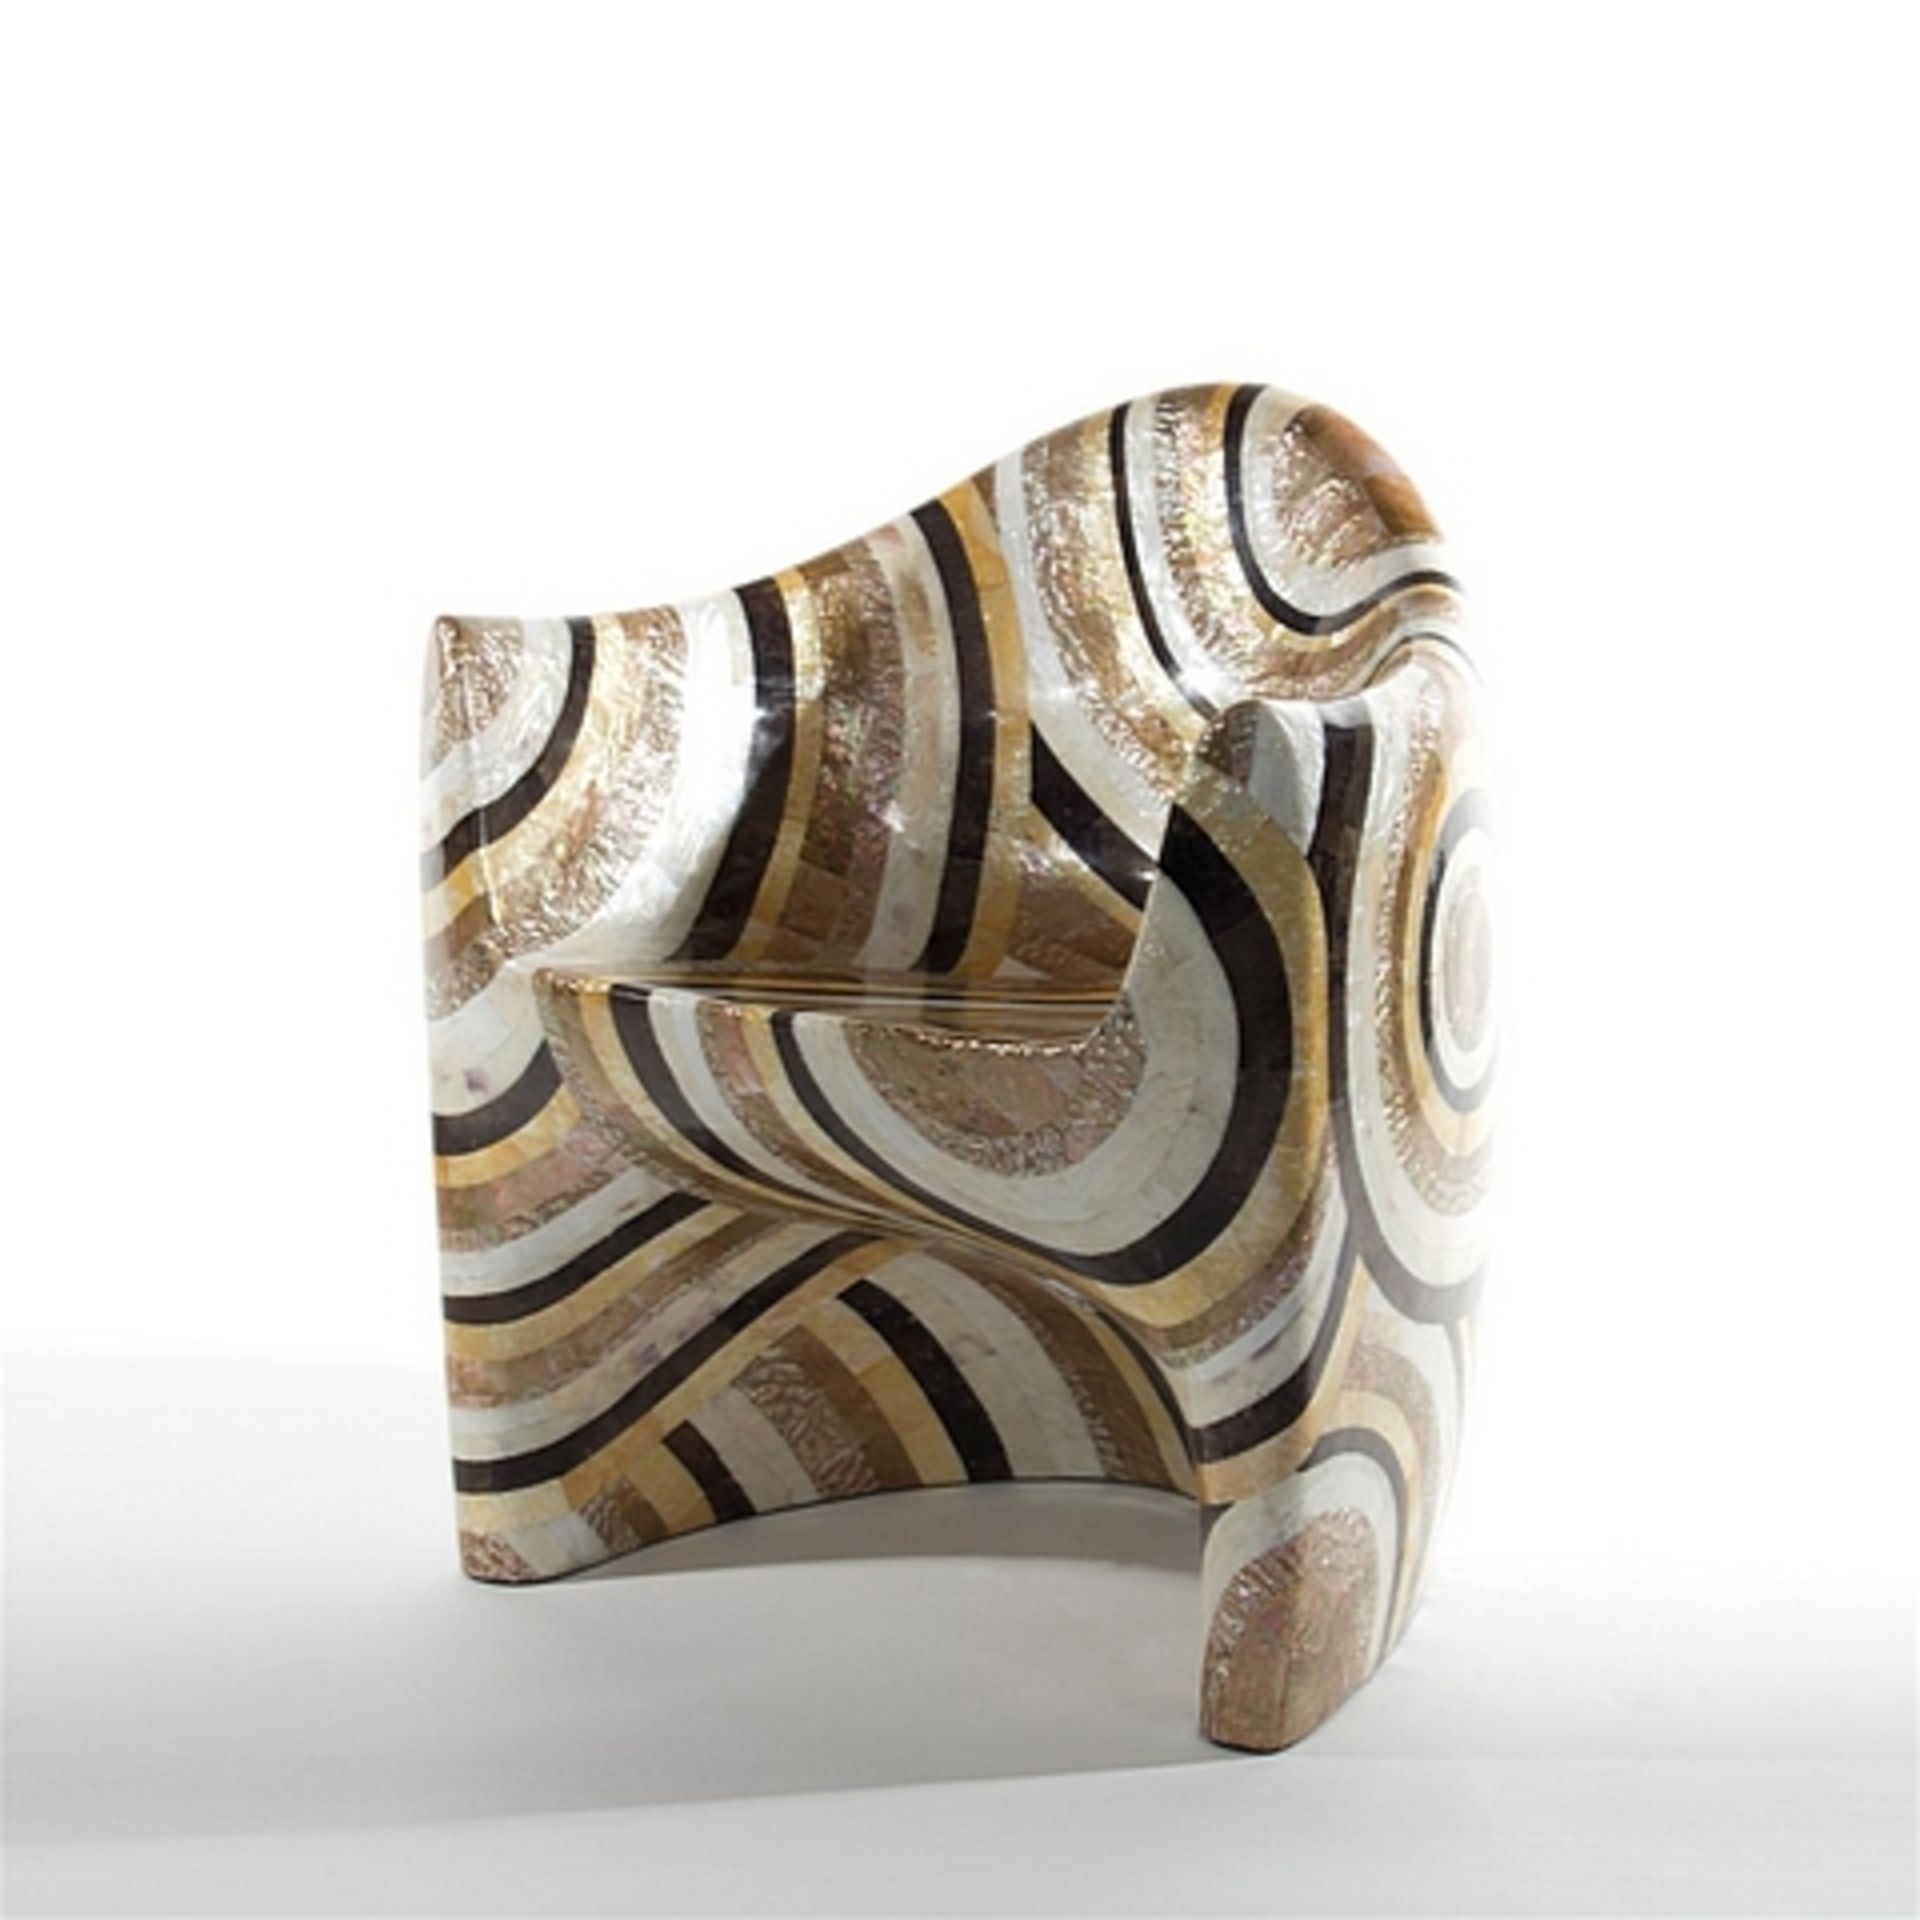 Chair circlet brown lip and beige paua shell. Fabulously retro with stripes of natural tones, even